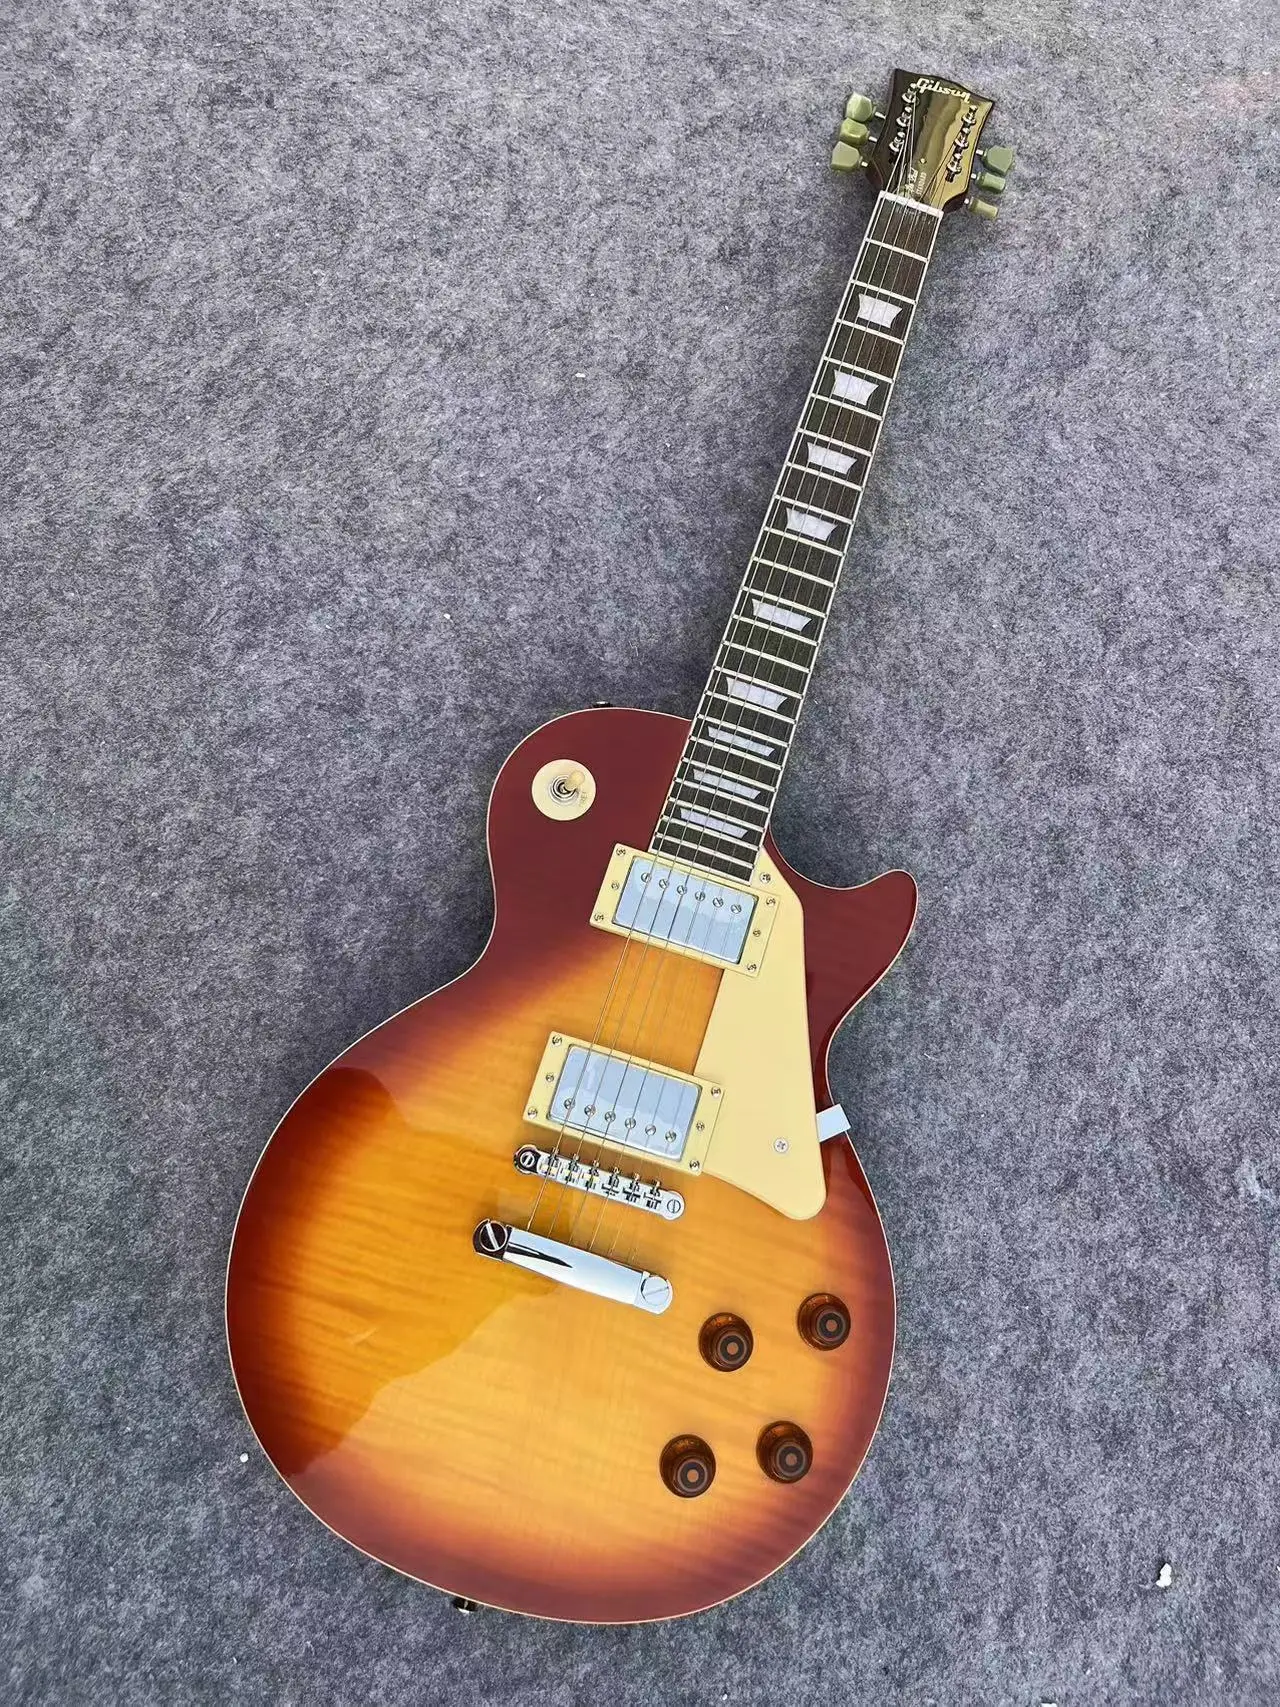 Send in 3 days Flame Maple Top G Les Standard Brown LP Paul Electric Guitar in stock  CFDZSVSDFCV